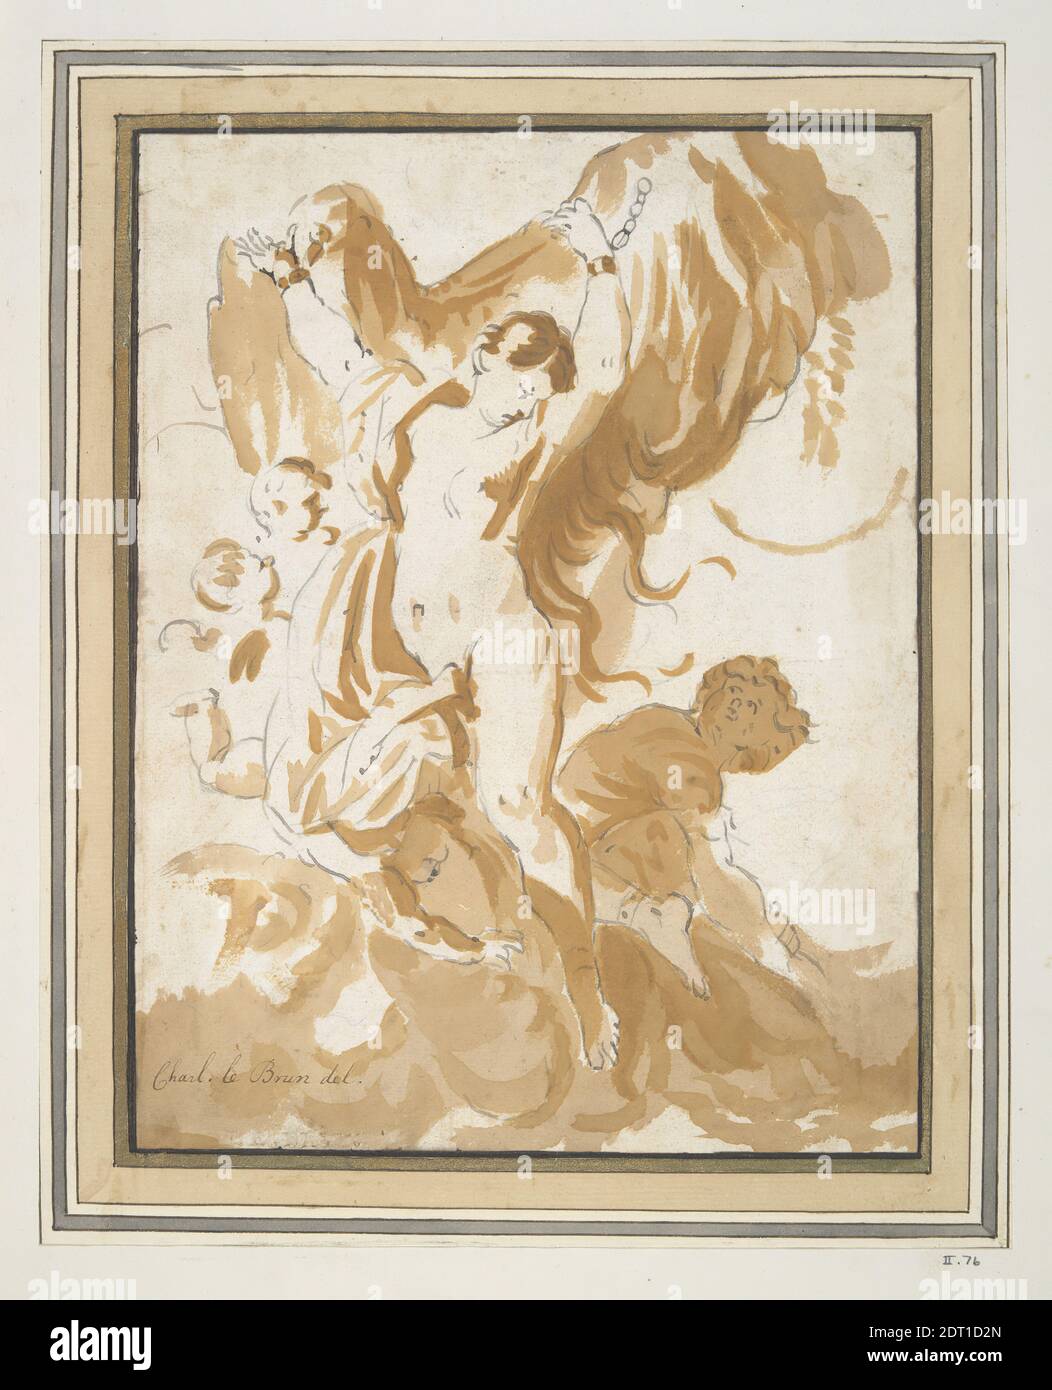 Artist, circle of: Charles Le Brun, French, 1619–1690, Andromeda, 17th century, Brush and grey ink and brown wash over black chalk, image: 24 × 18.4 cm (9 7/16 × 7 1/4 in.), Made in France, French, 17th century, Works on Paper - Drawings and Watercolors Stock Photo